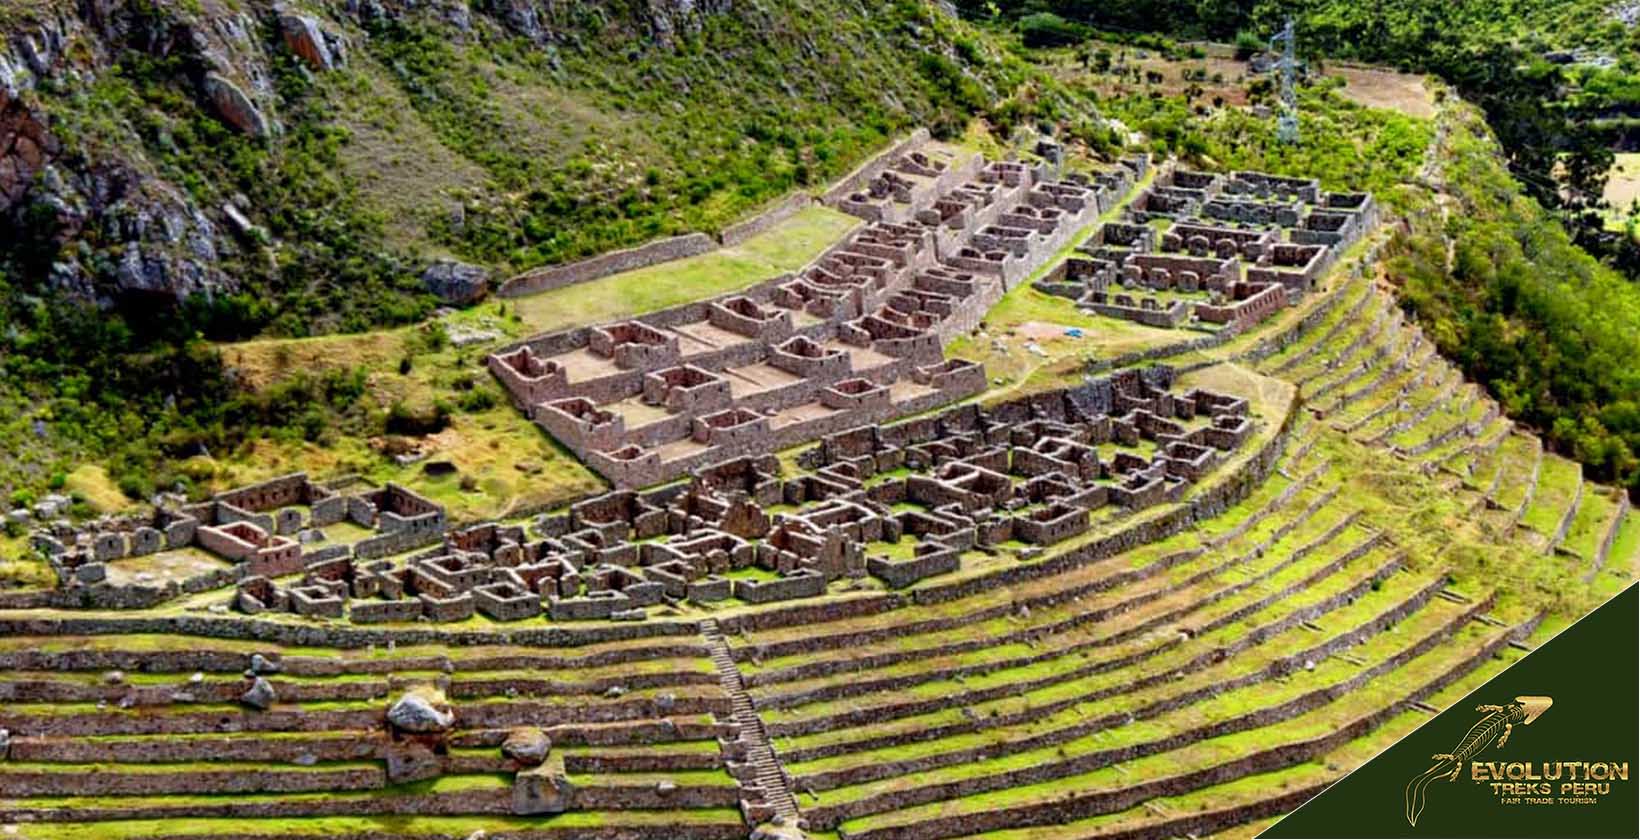 Patallacta Peru Guide: History, Hiking, Facts, Maps, and Tours